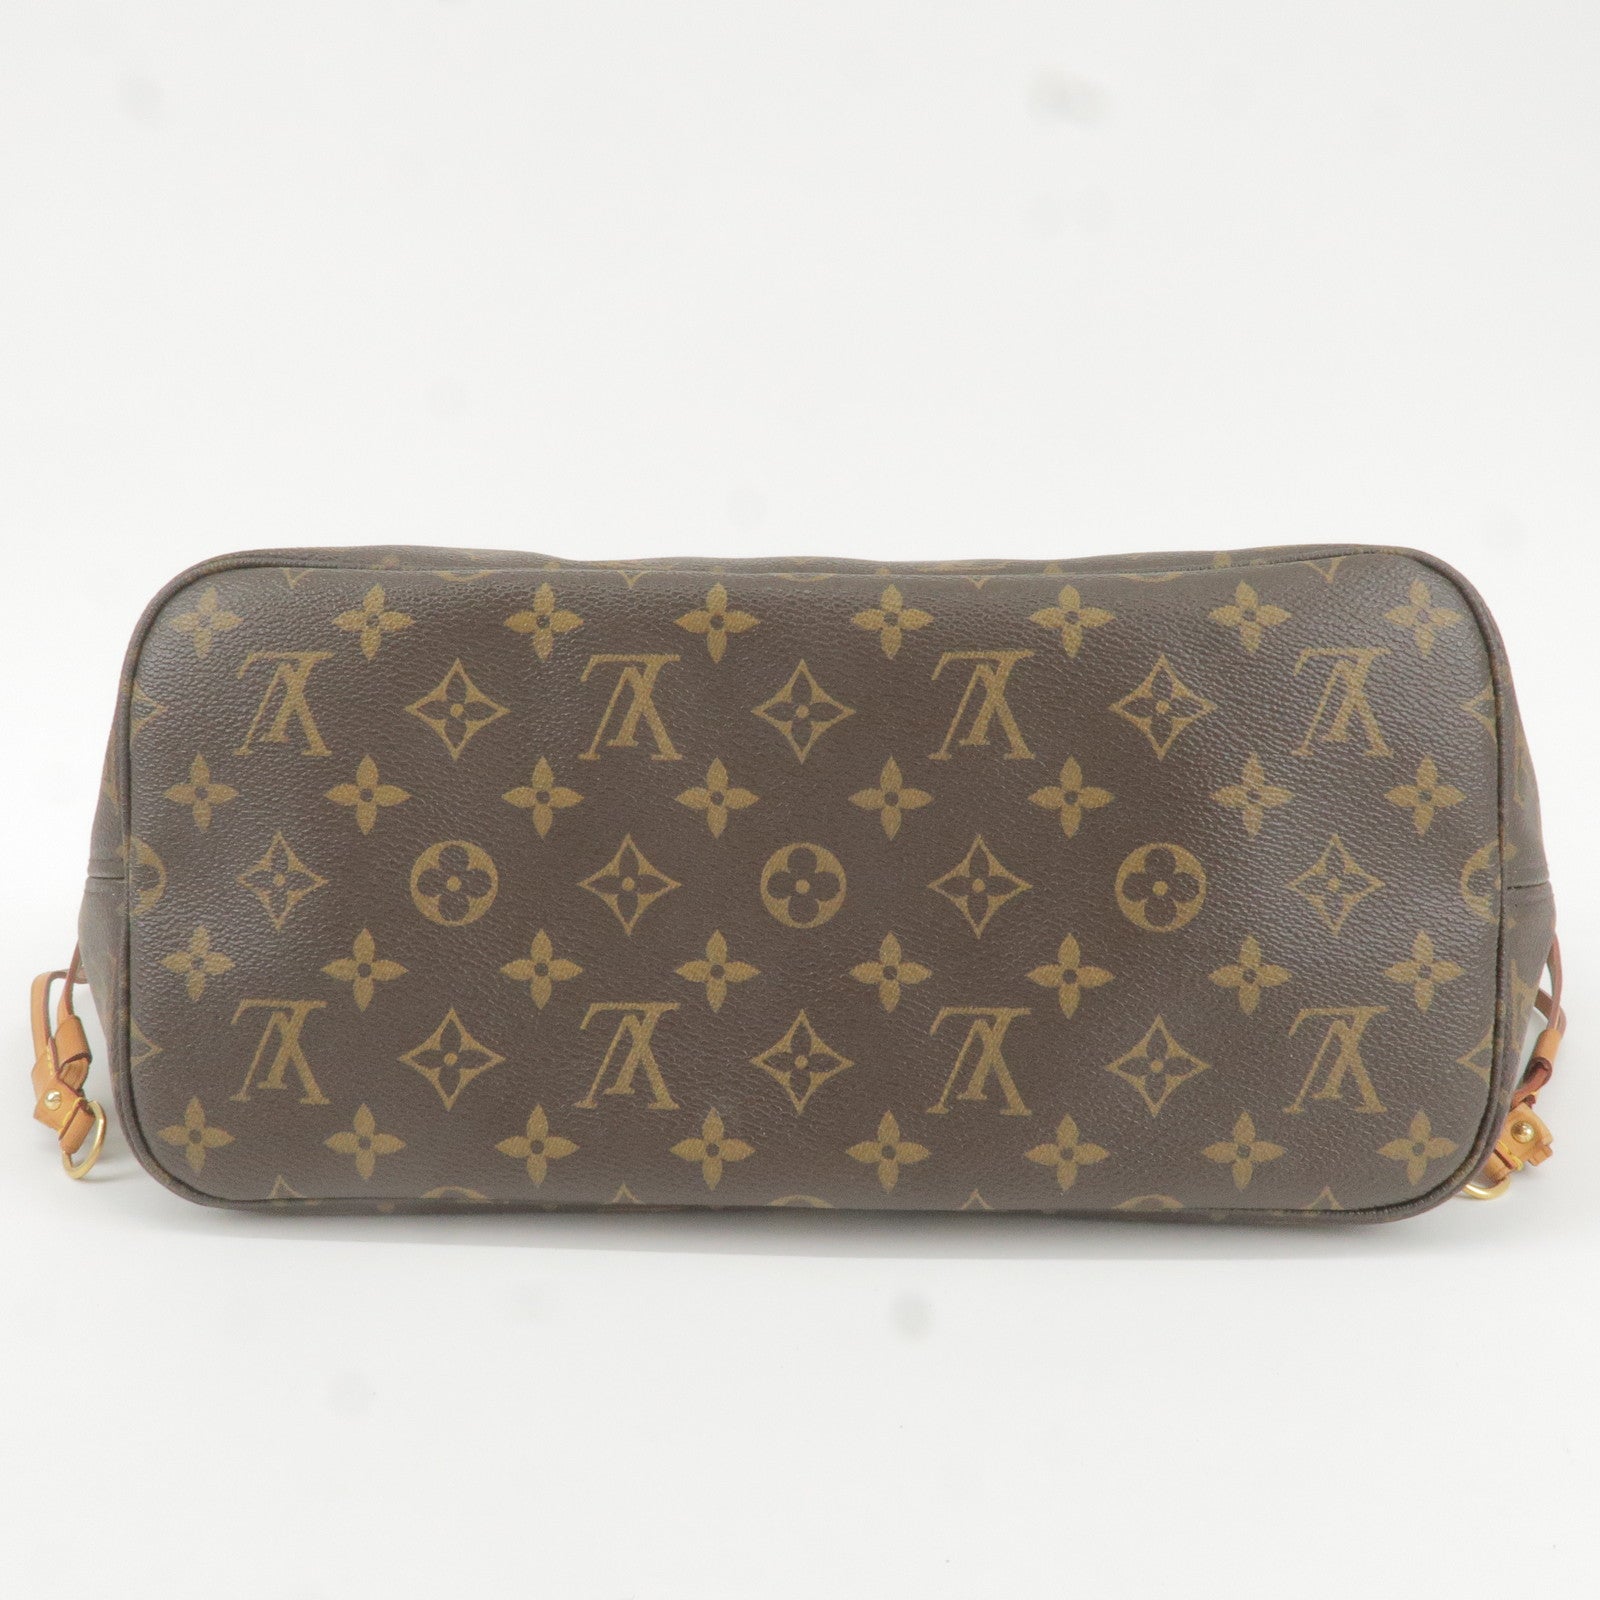 Vintage LOUIS VUITTON Monogram Neverfull MM Pouch - Pouch Only